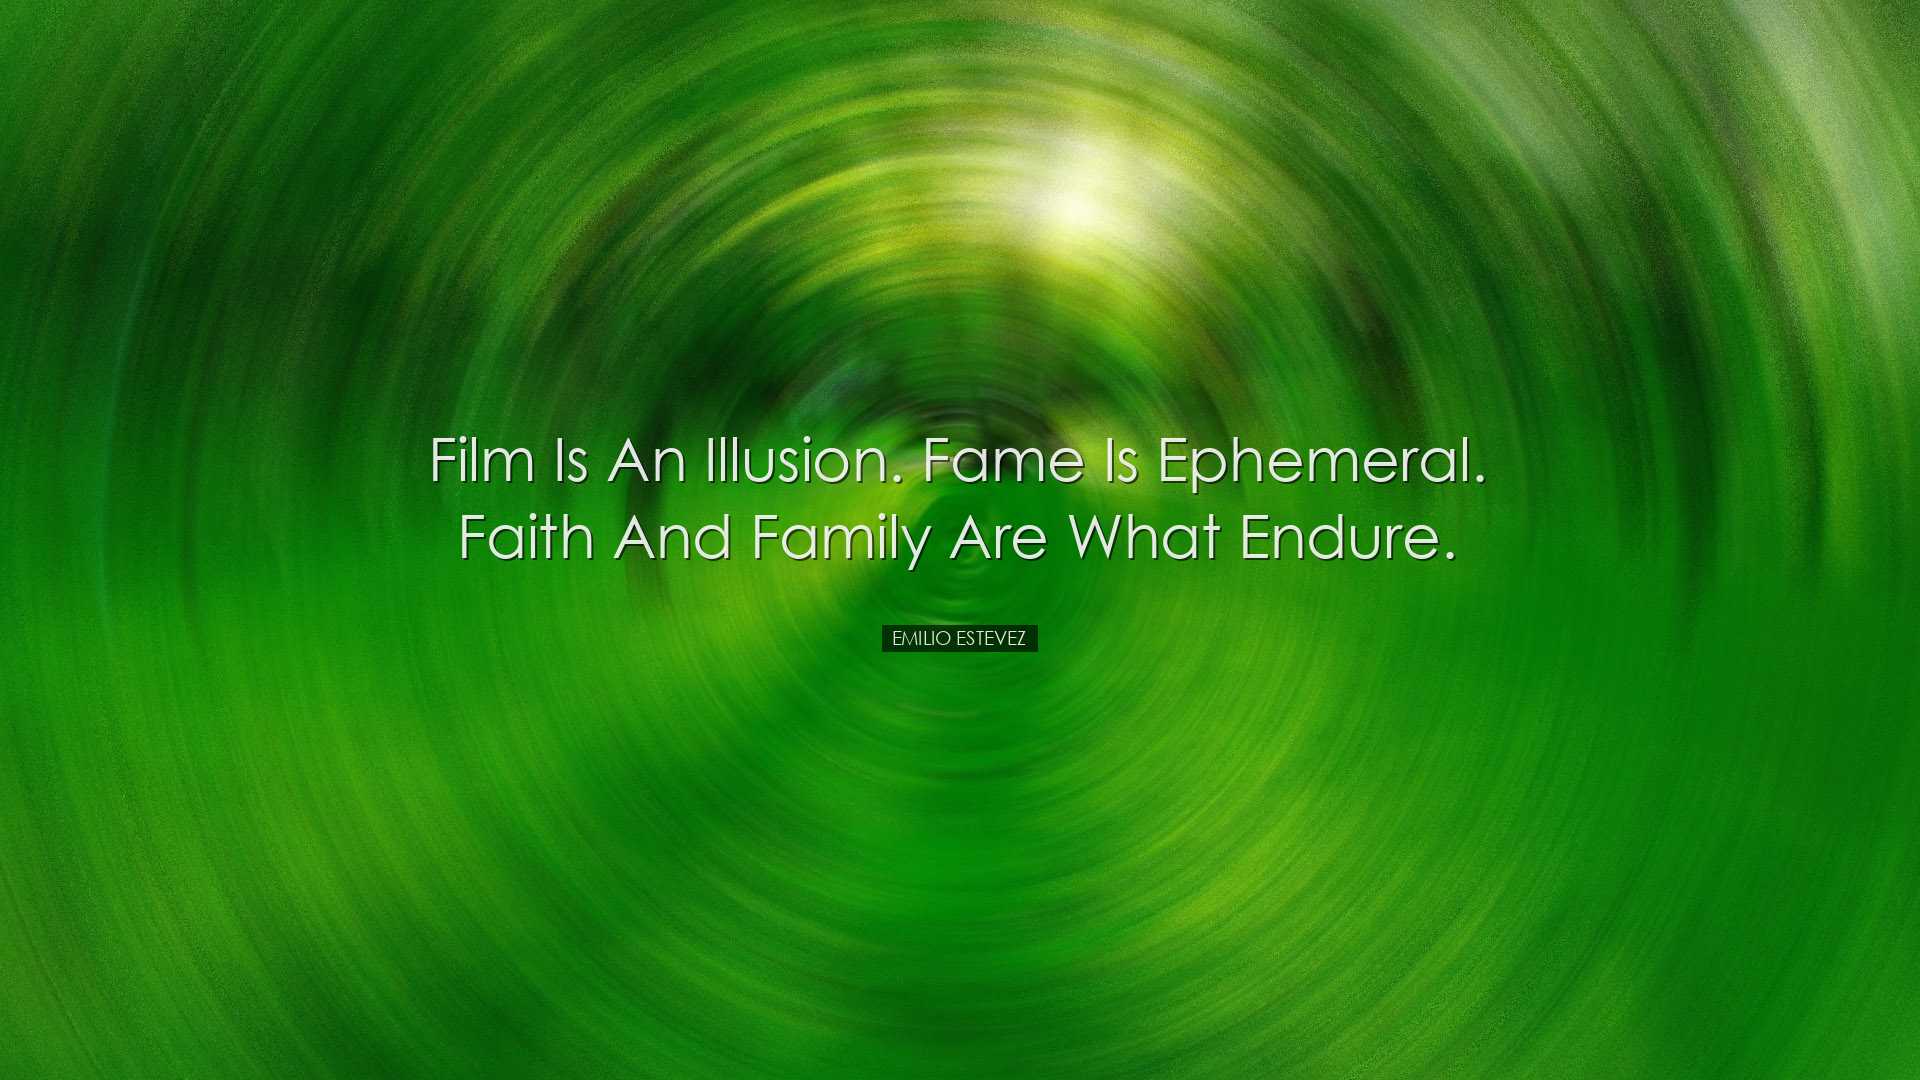 Film is an illusion. Fame is ephemeral. Faith and family are what